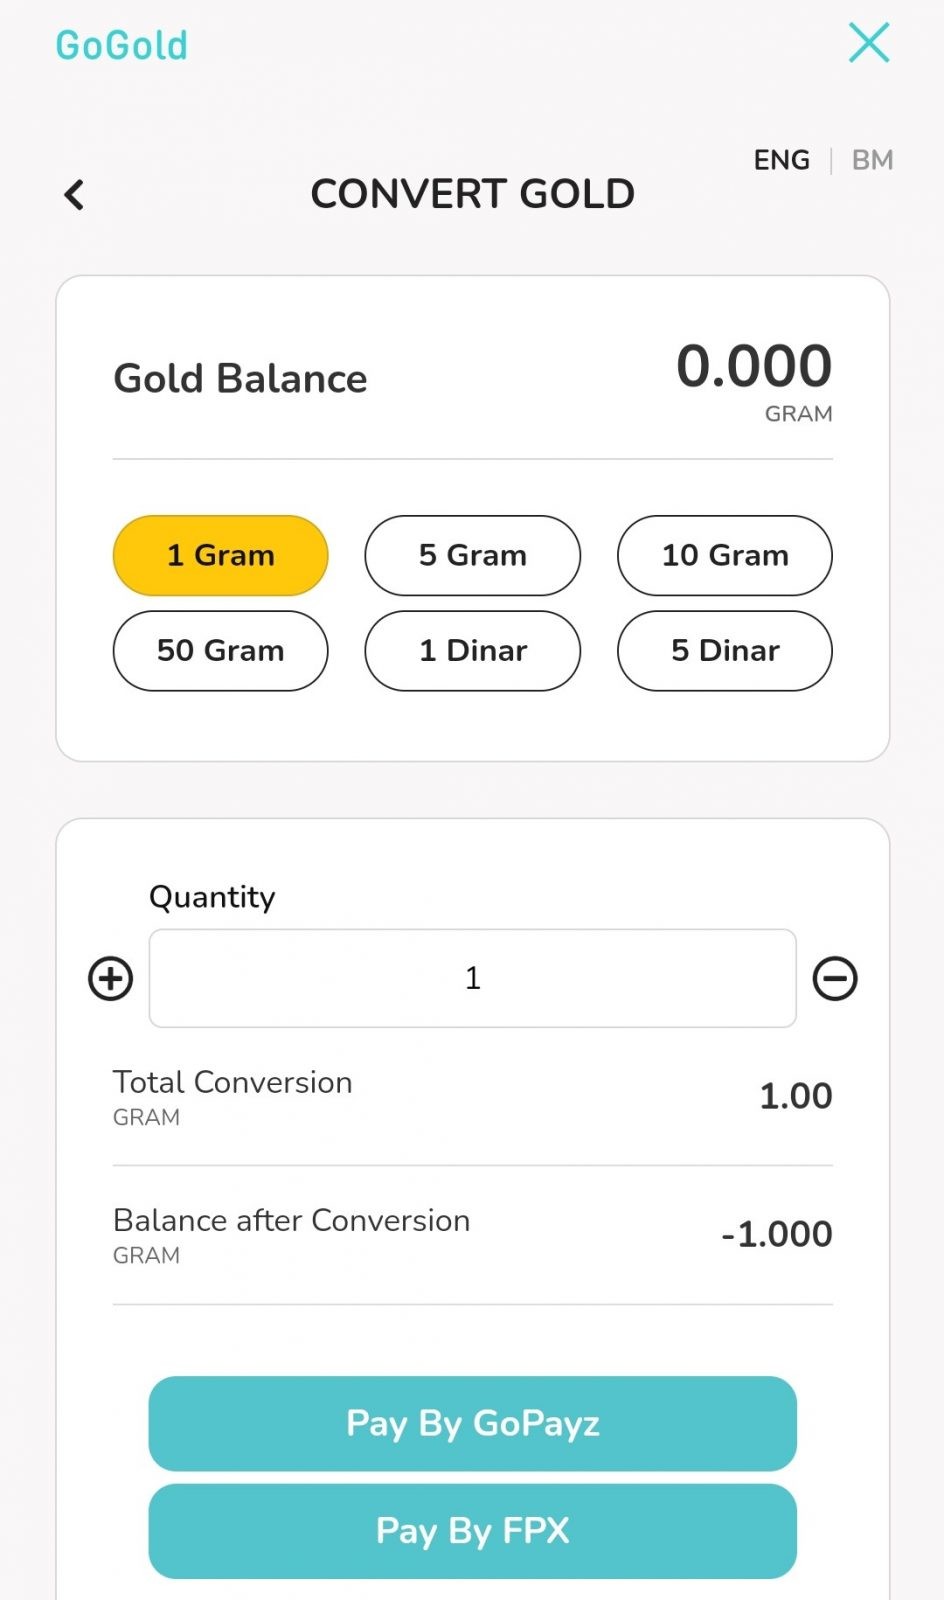 Convert gold in GoGold easily from 1 gram.